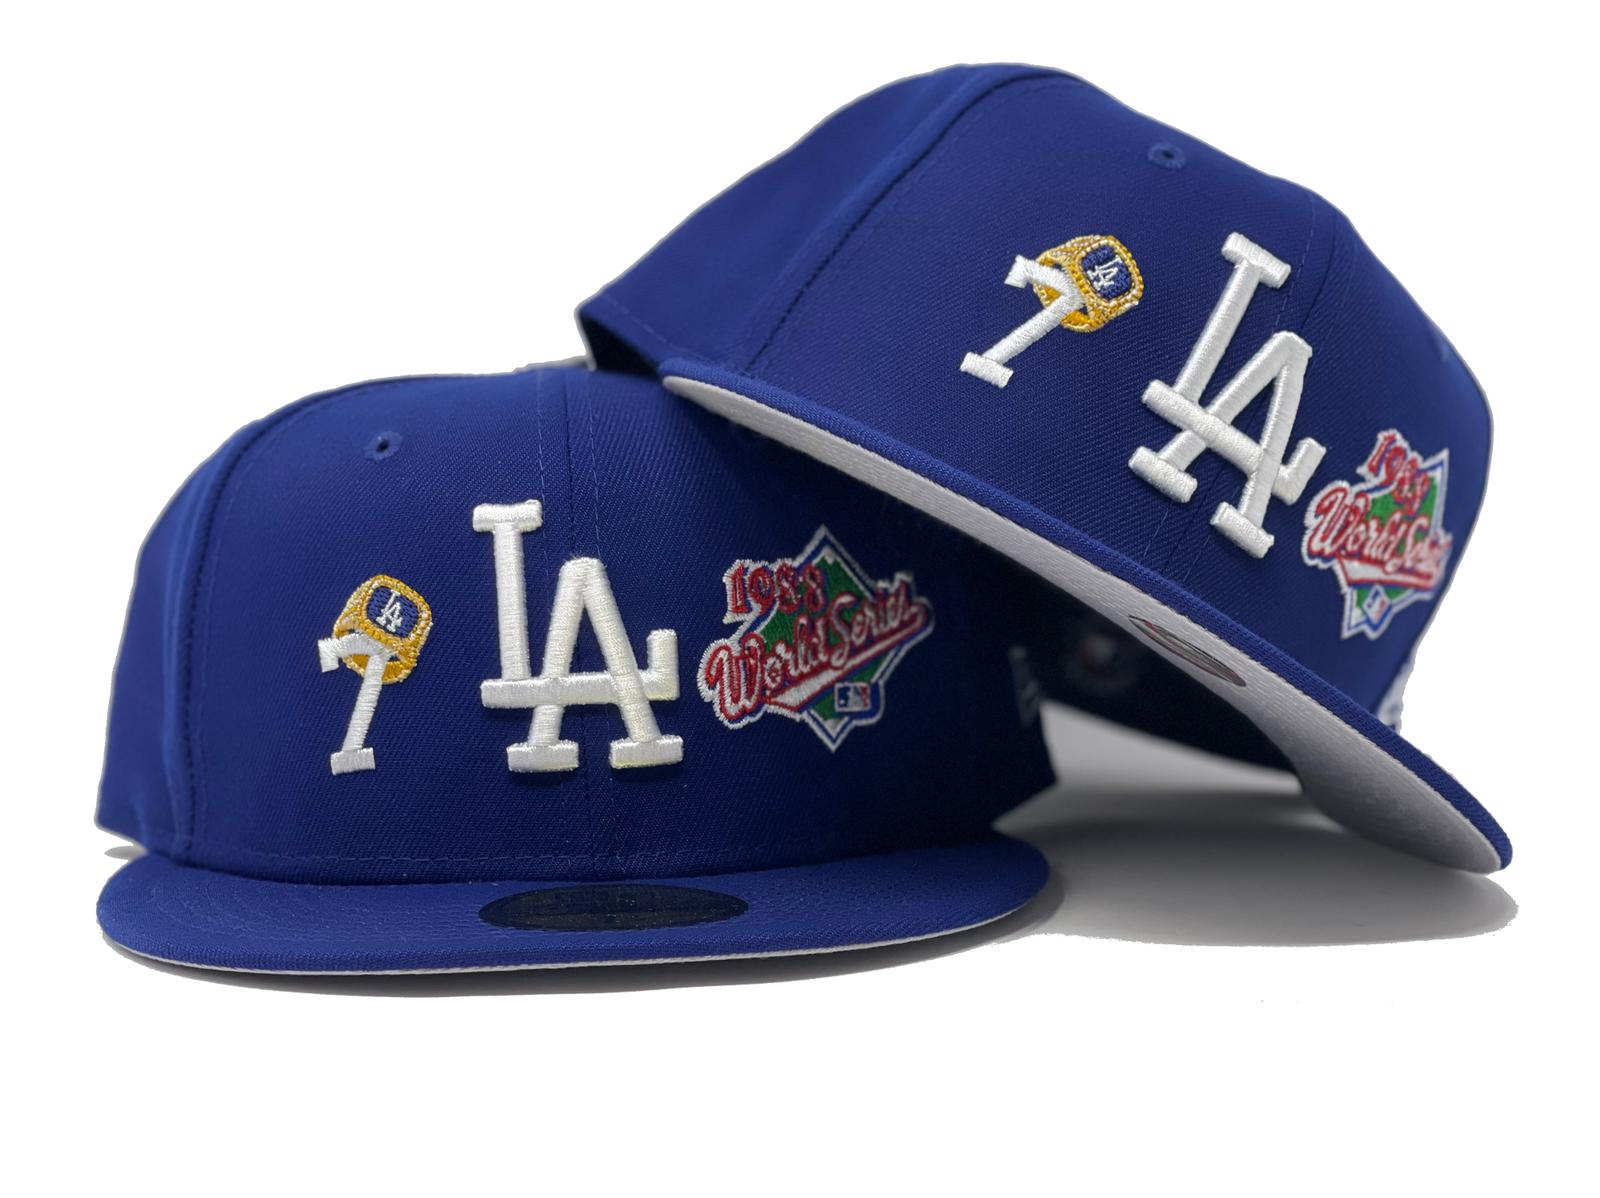 Los Angeles Dodgers 7x Champions Rose Crown New Era 59FIFTY Blue